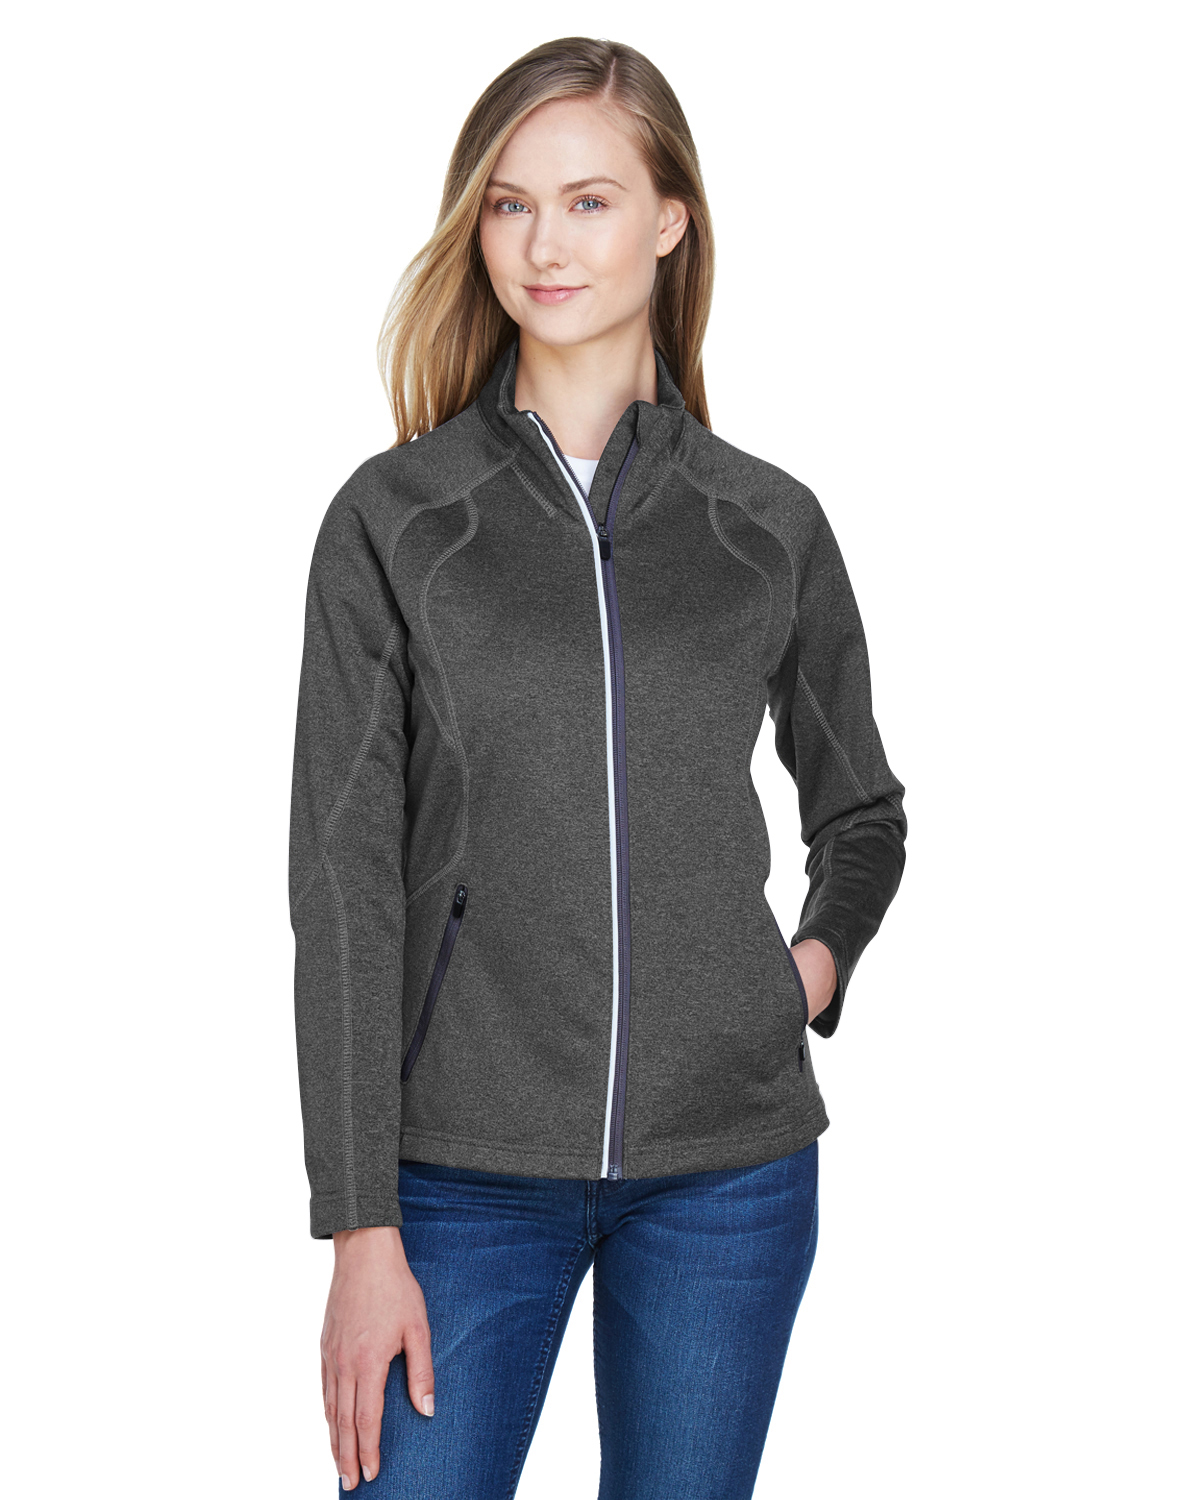 The Ash City - North End Ladies' Gravity Performance Fleece Jacket - CARBN HEATH 452 - S - image 1 of 2